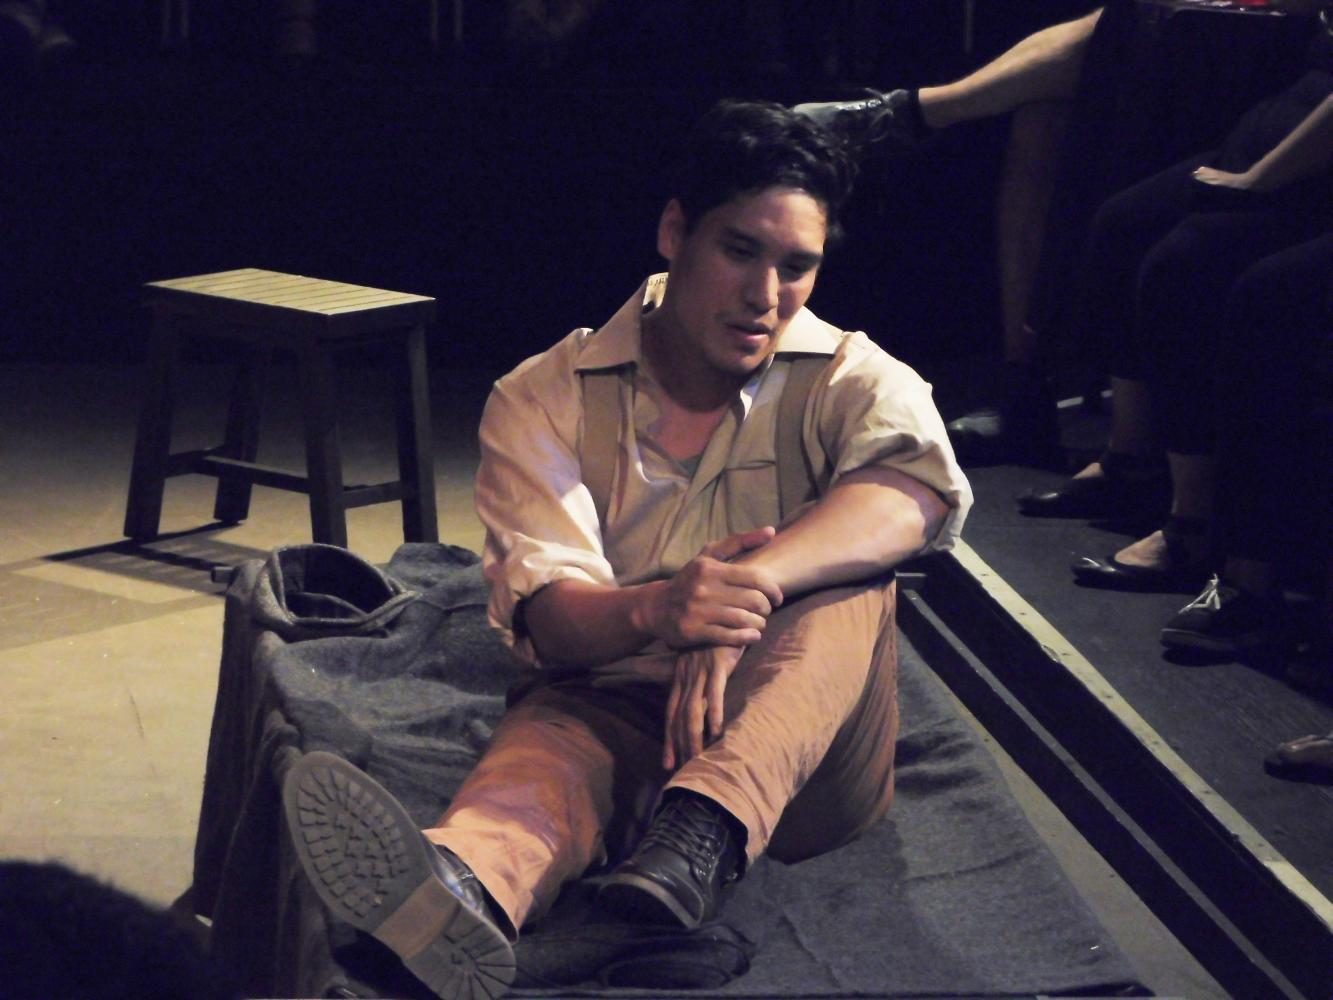 George (Nick Ono) talking about his friend Lennie on The Empty Space Theatre stage while sitting down and holding his left wrist.